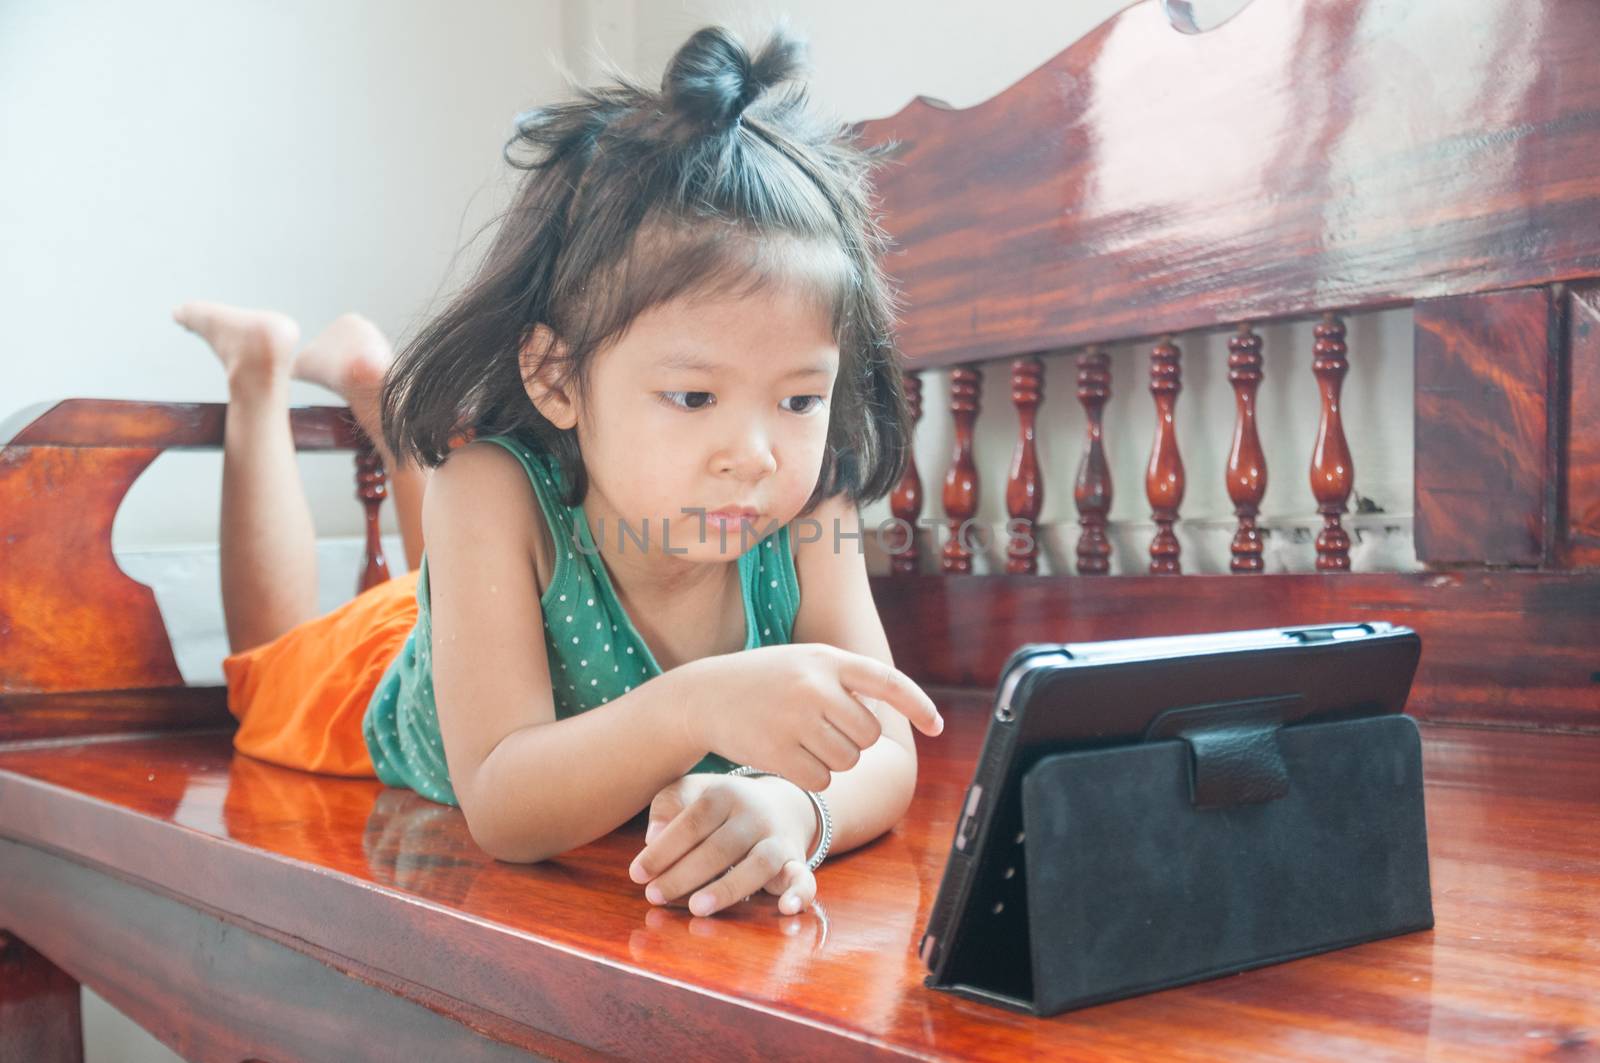 Young Girl lying on wooden stool and Learning online course on W by thampapon